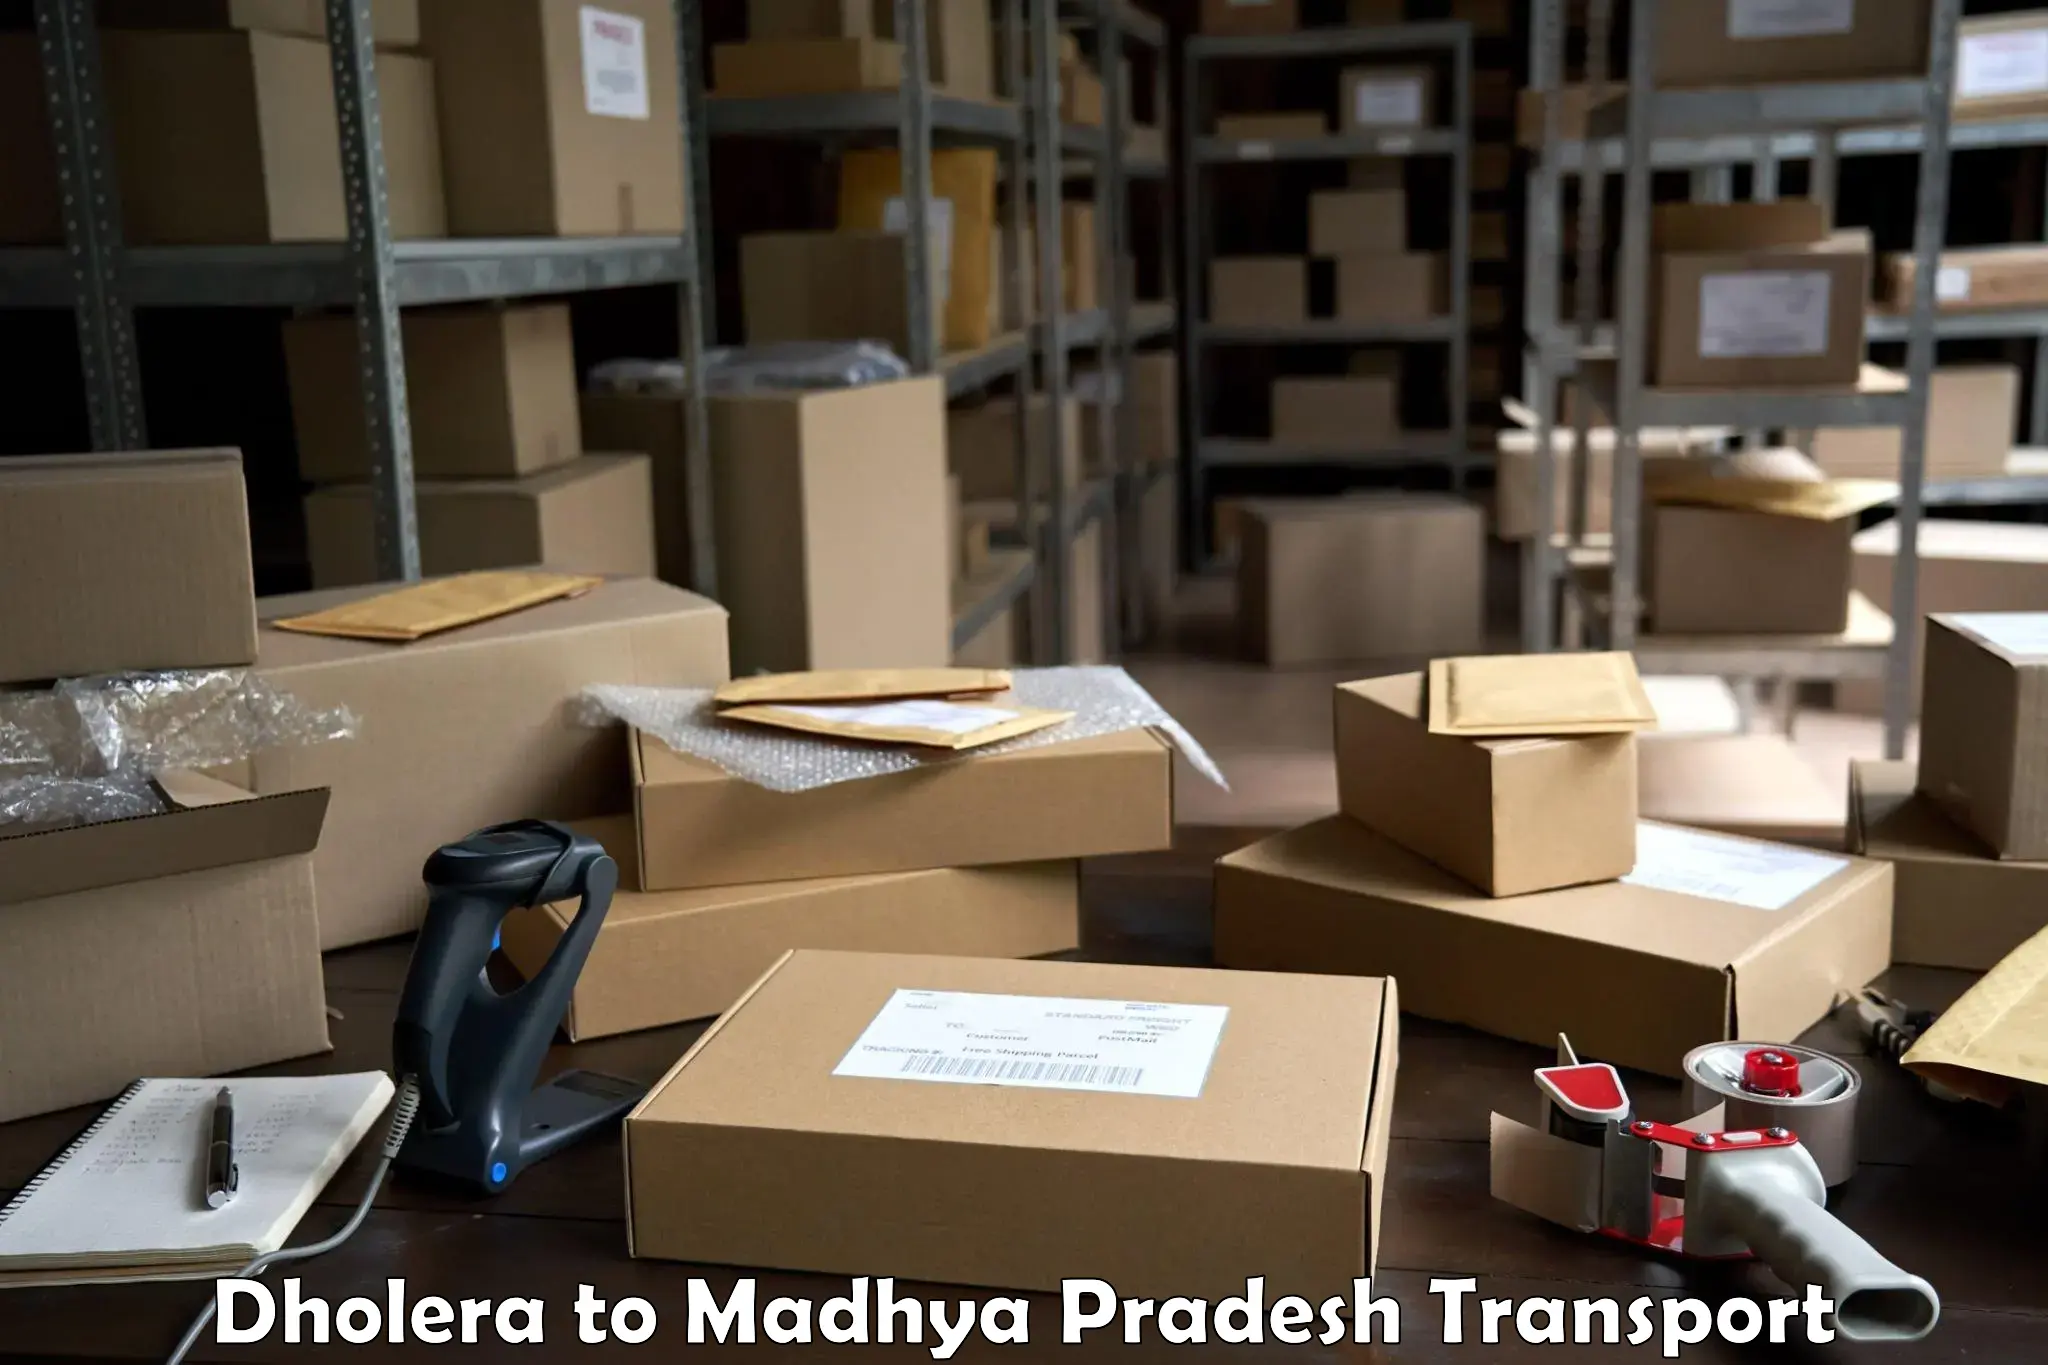 Transport bike from one state to another Dholera to Karera